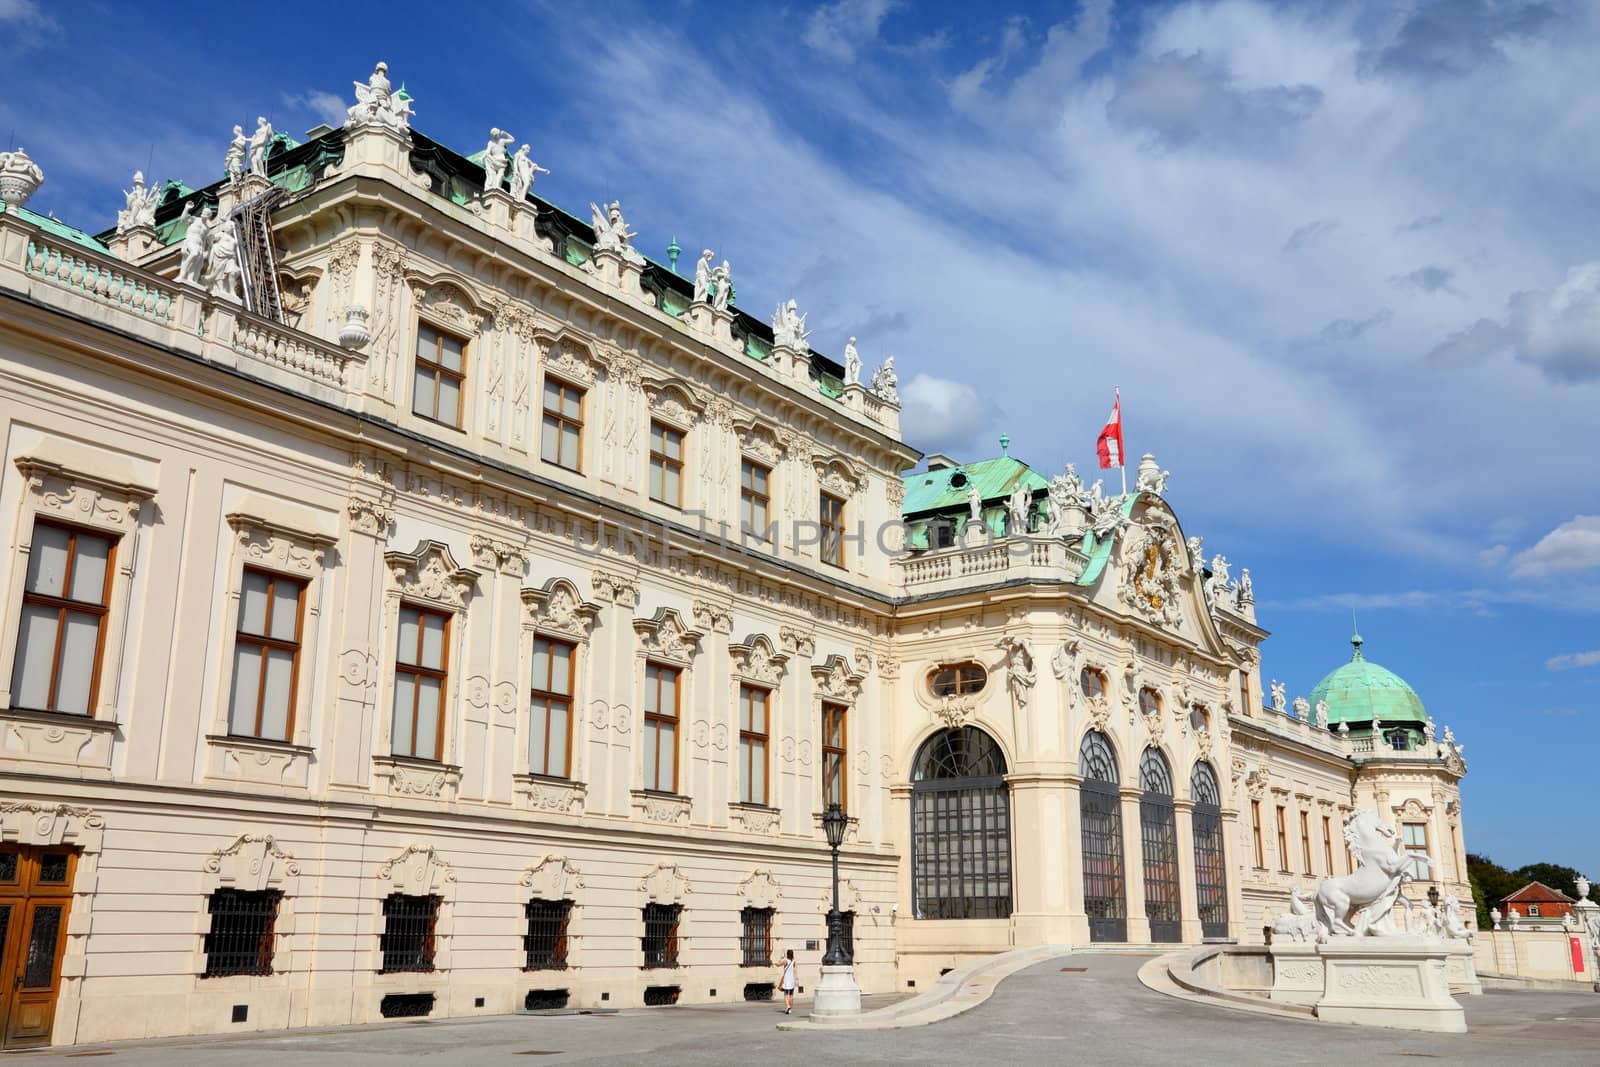 Vienna, Austria - Belvedere Palace building. The Old Town is a UNESCO World Heritage Site.